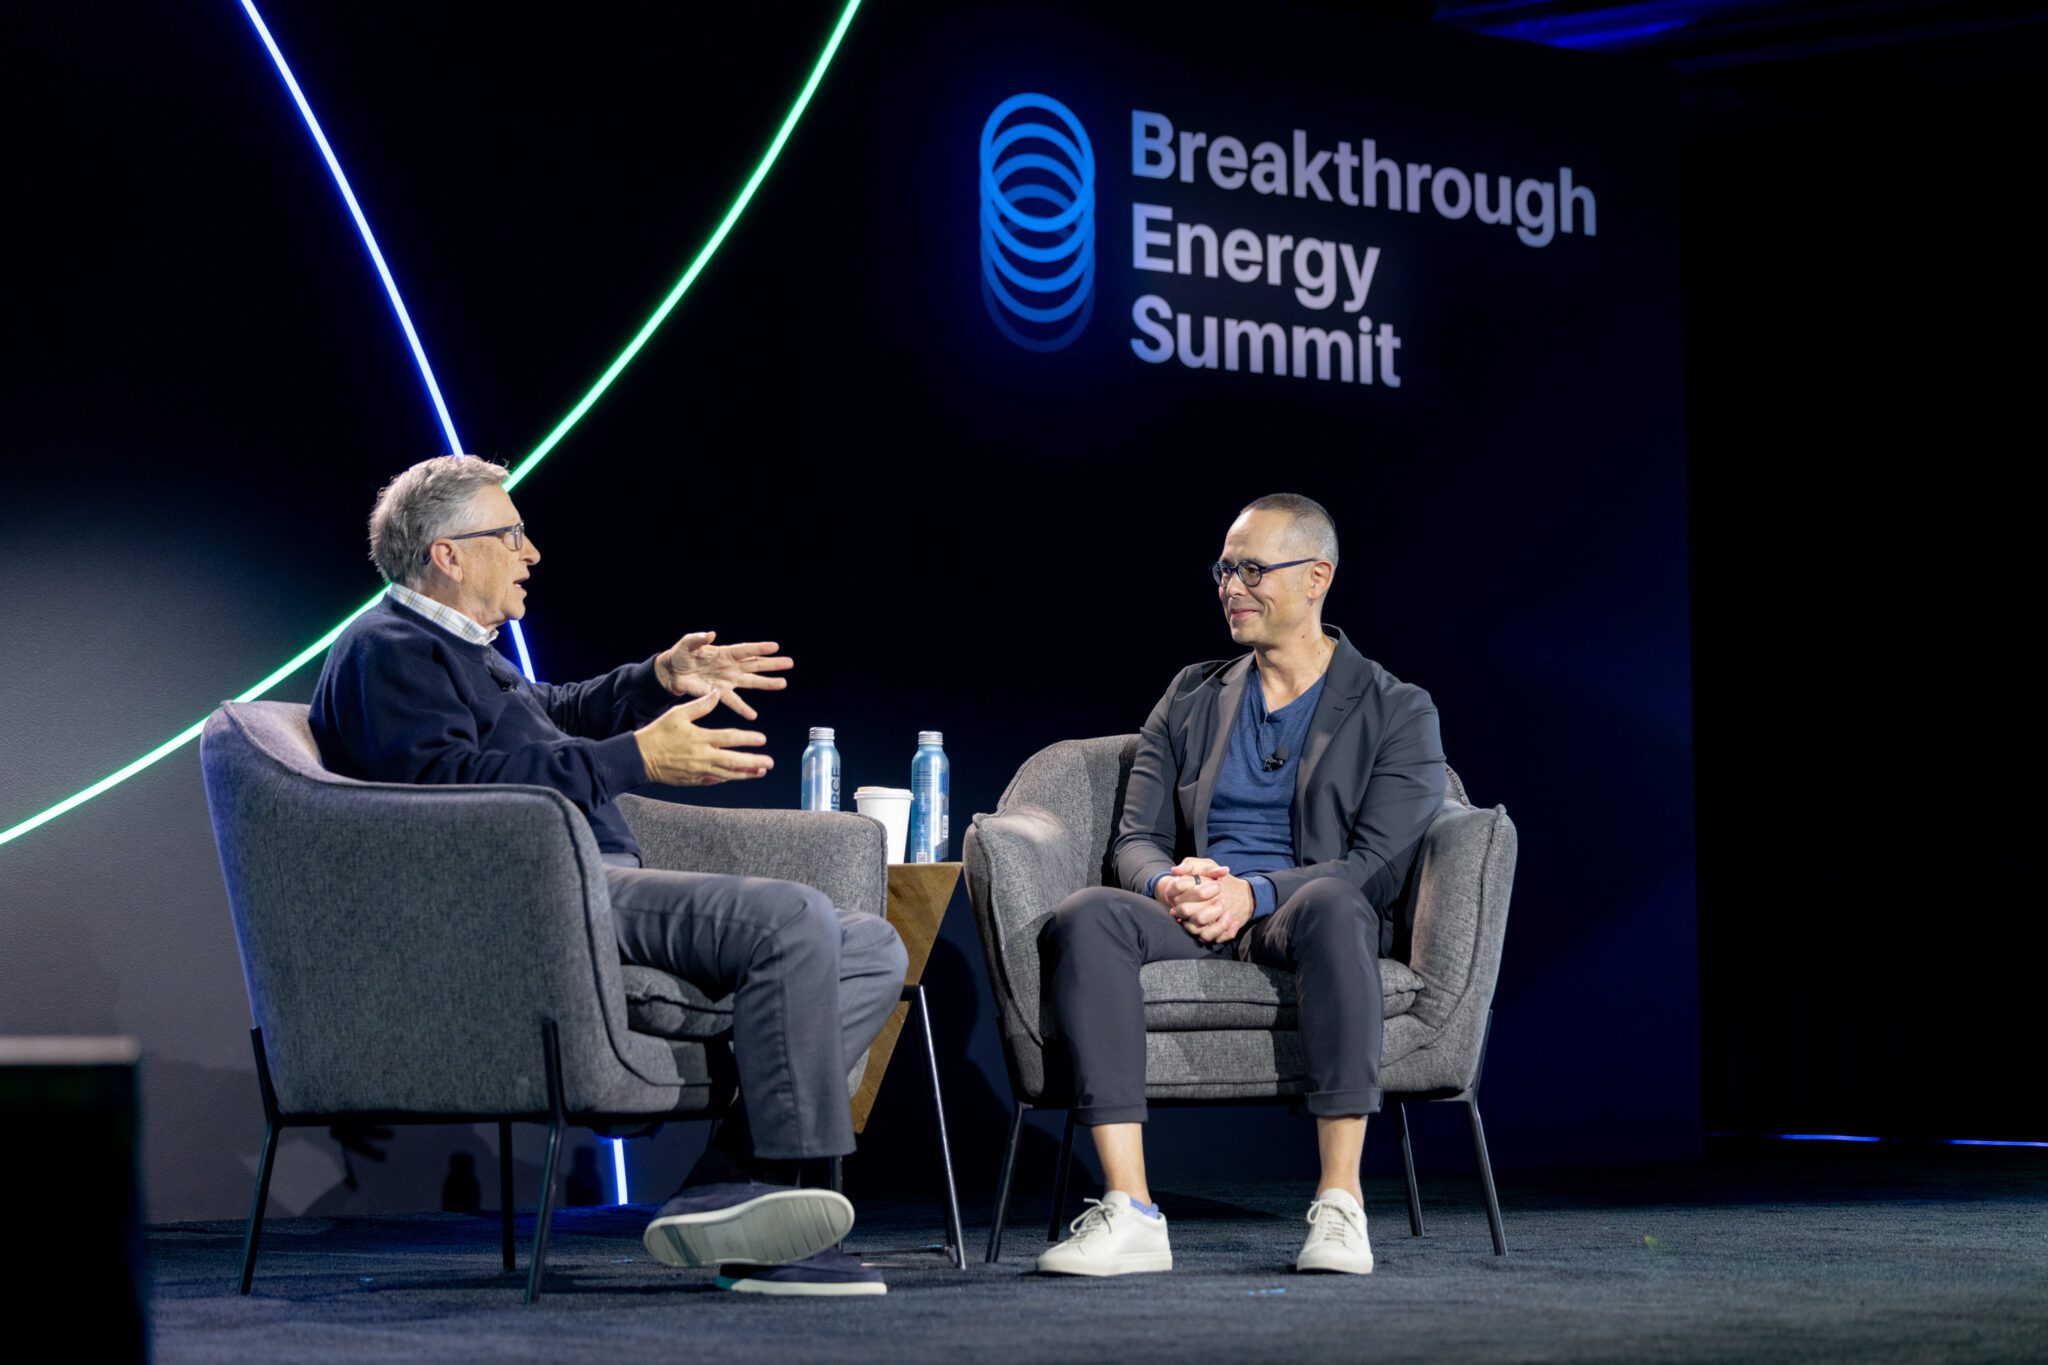 Breakthrough Energy Founder Bill Gates and Executive Director Rodi Guidero on stage at the Breakthrough Energy Summit